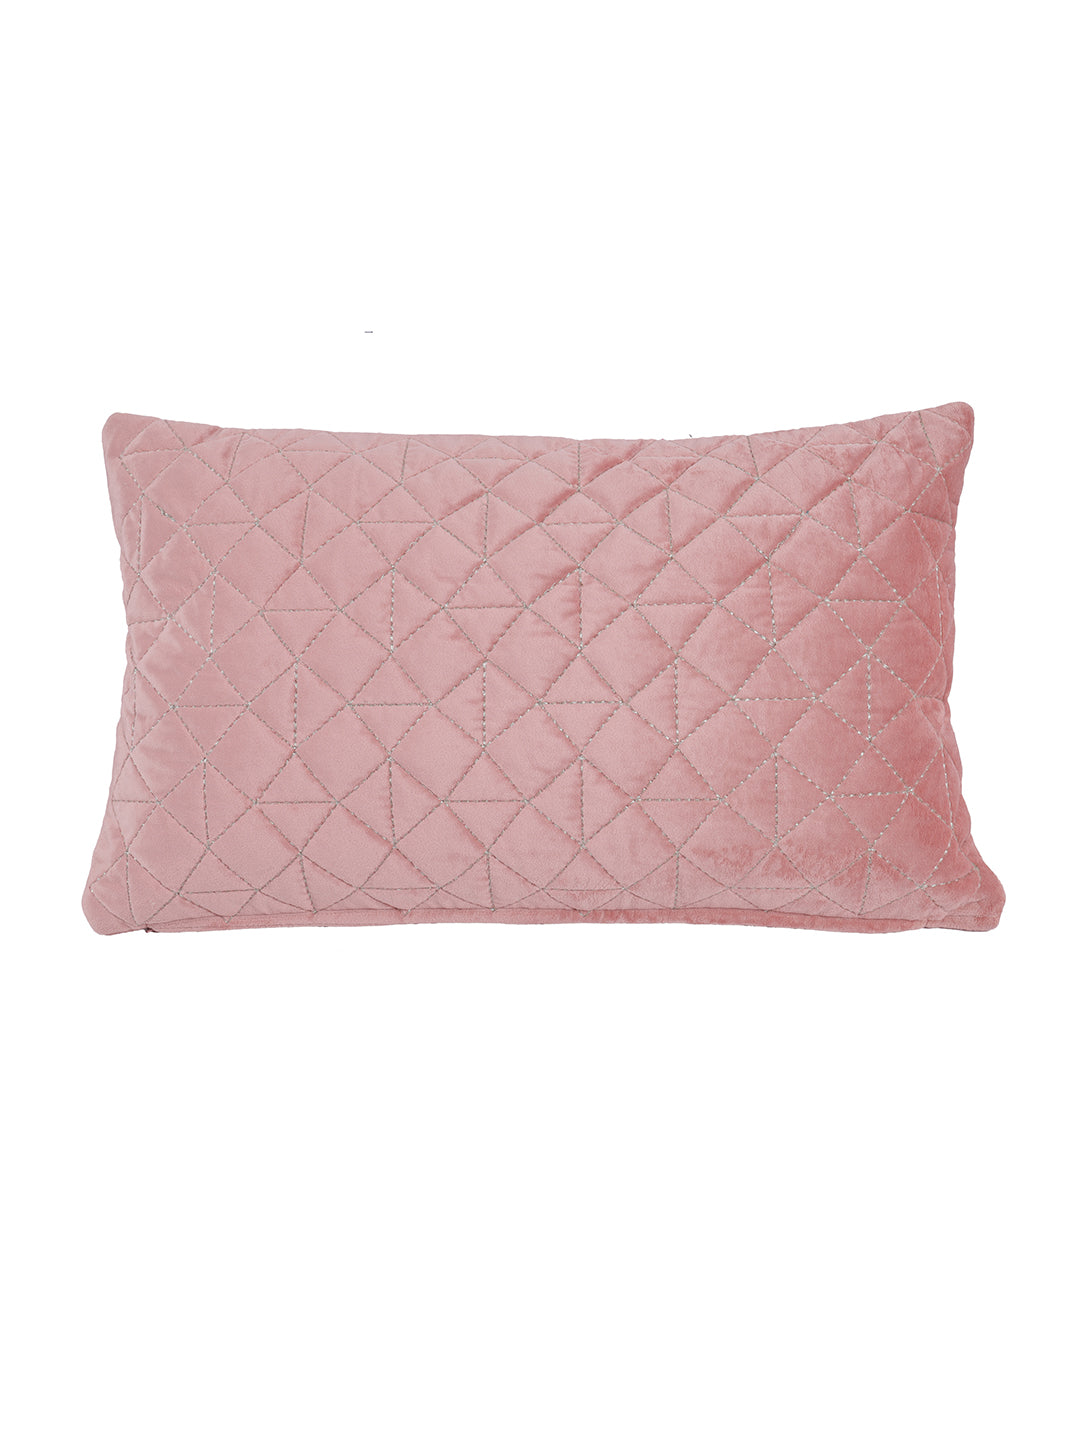 Set Of 2 Peach-Coloured Velvet Quilted Rectangle Cushion Covers